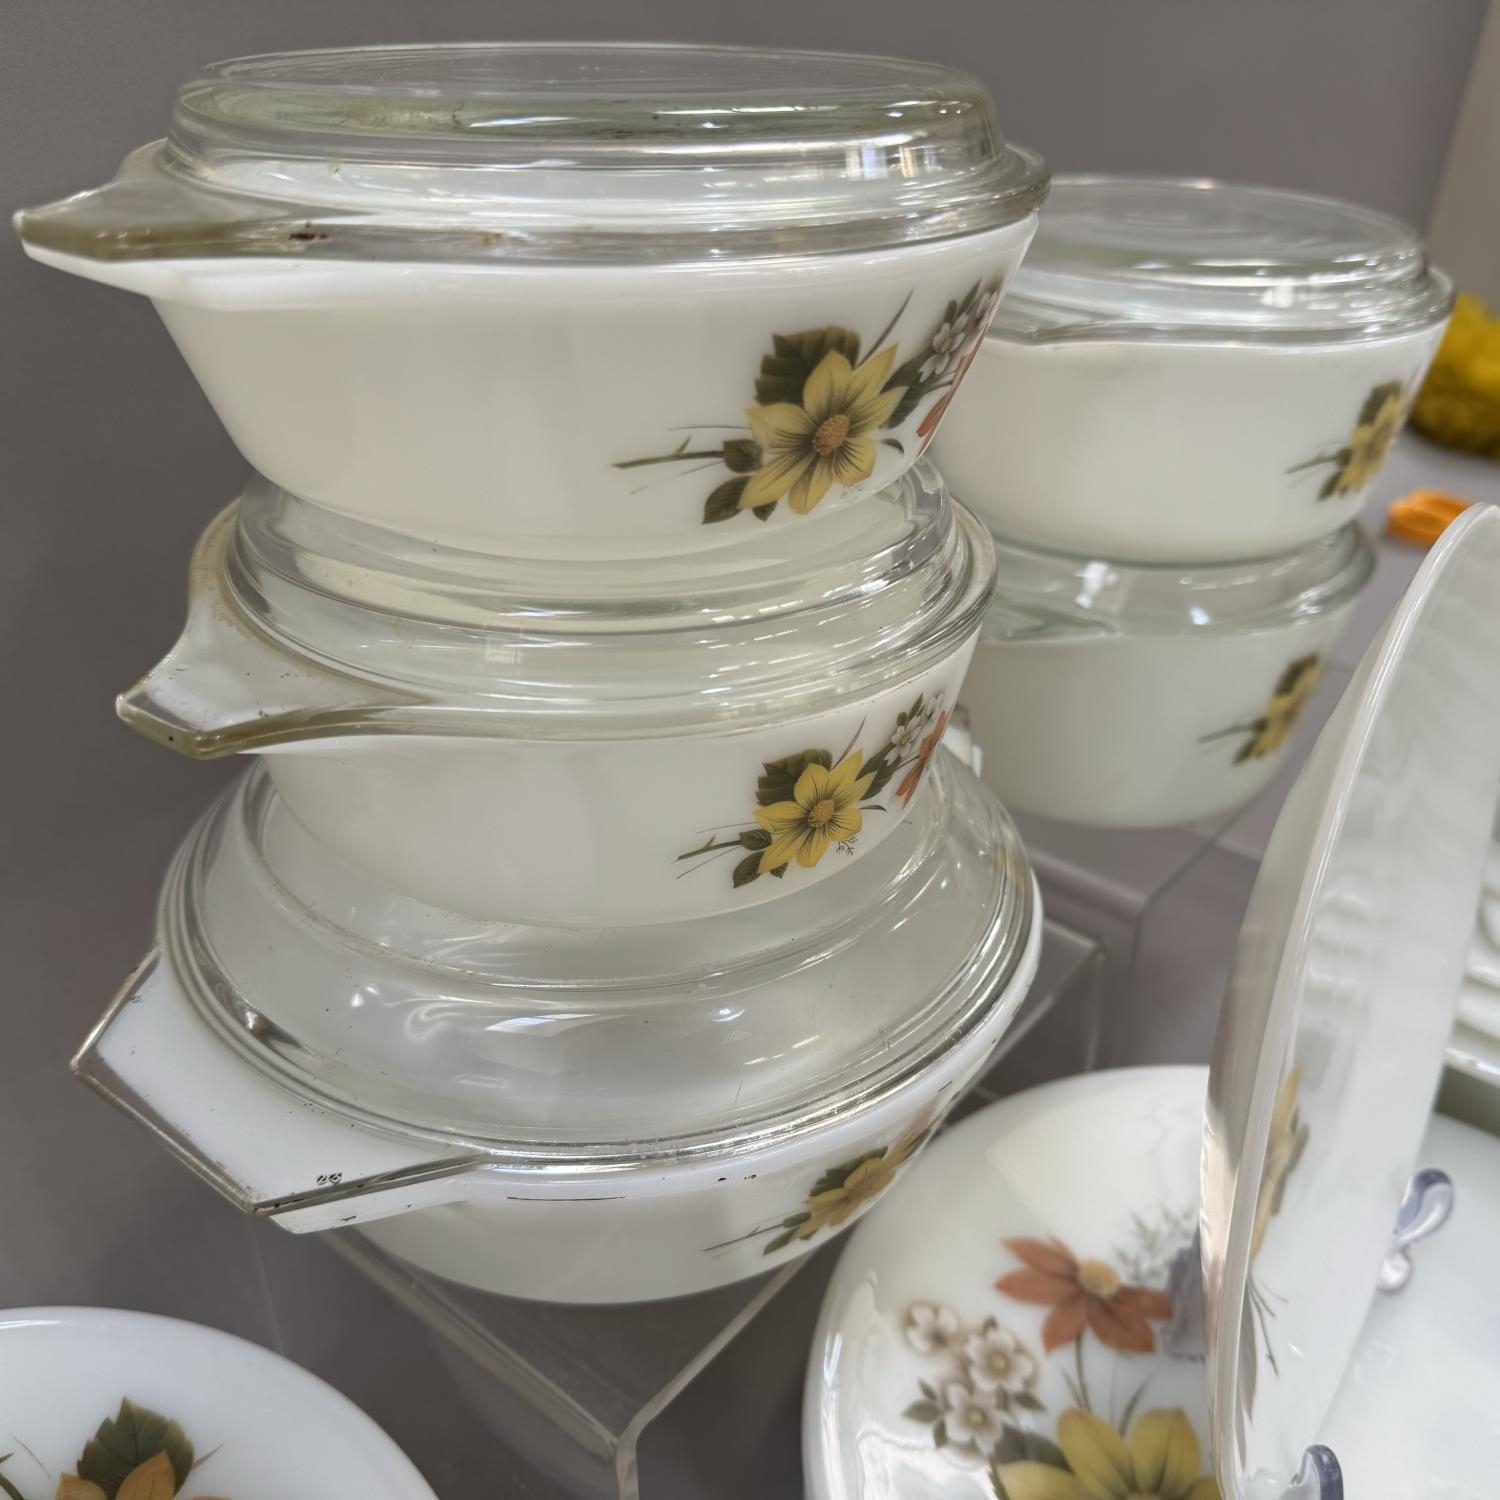 An extensive collection of vintage Pyrex ware decorated with flowers in shades of brown and - Image 4 of 4